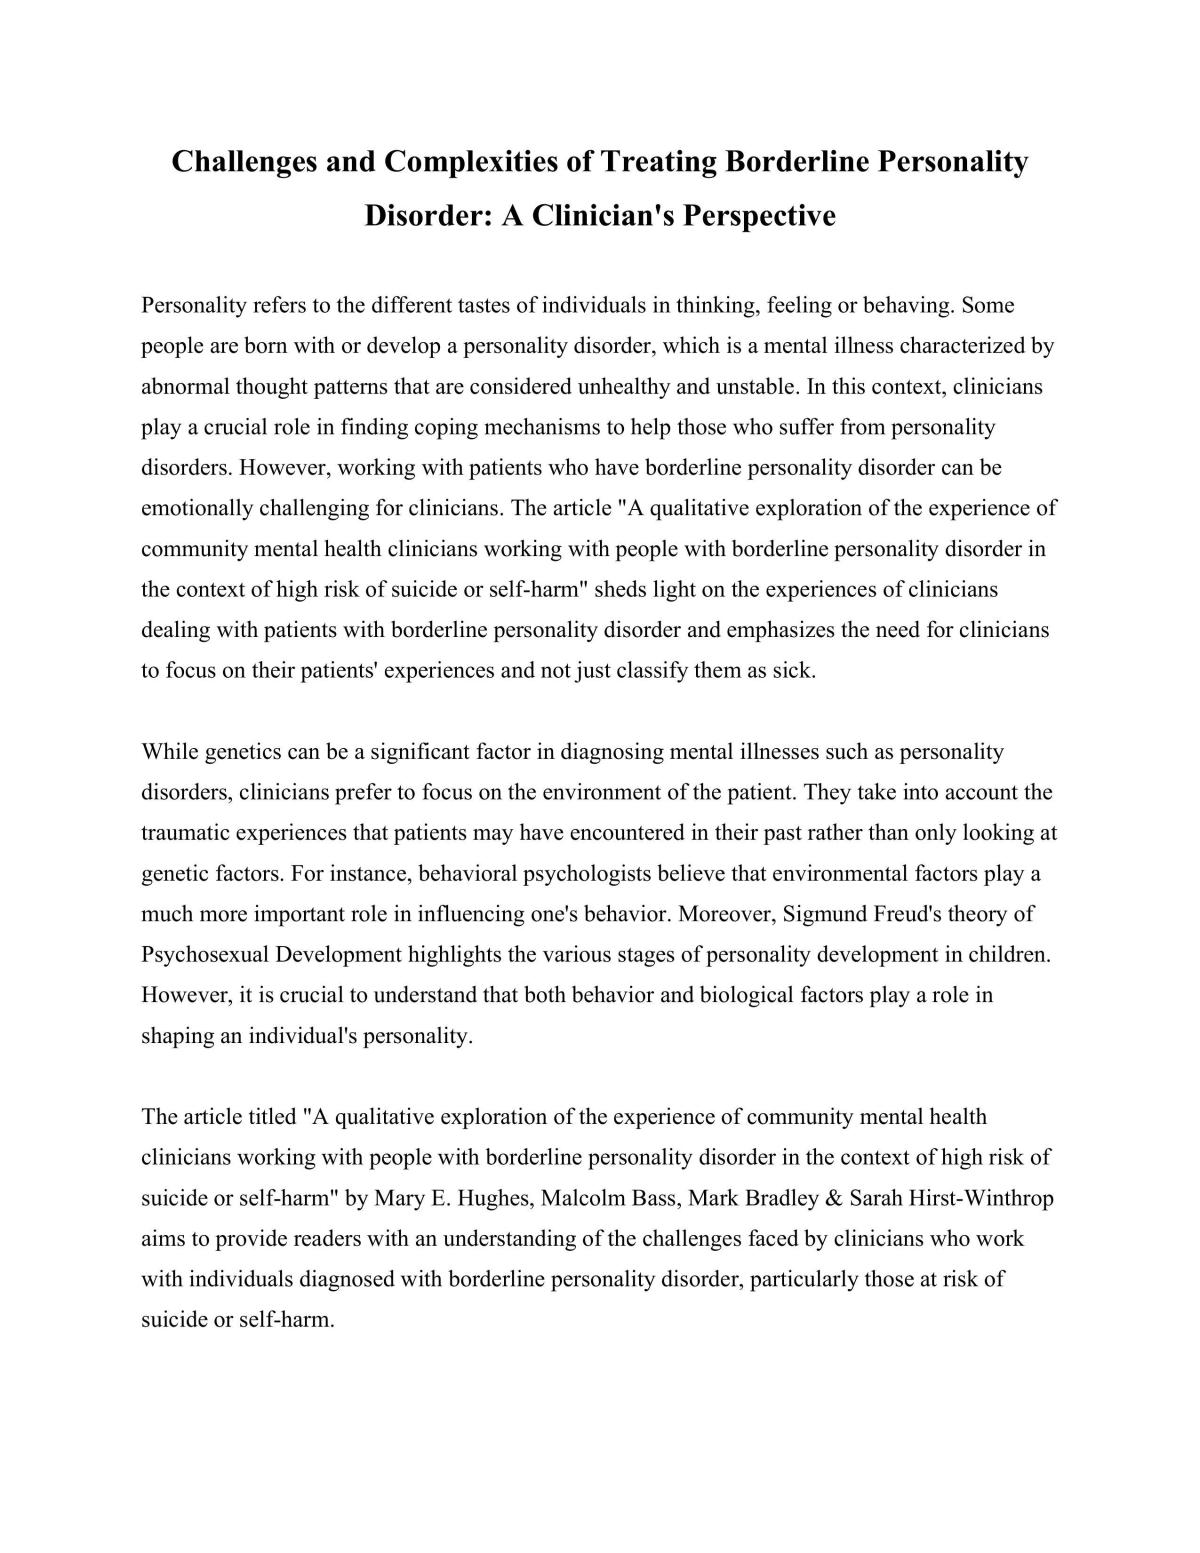 Challenges and Complexities of Treating Borderline Personality Disorder: A Clinician's Perspective - Page 1